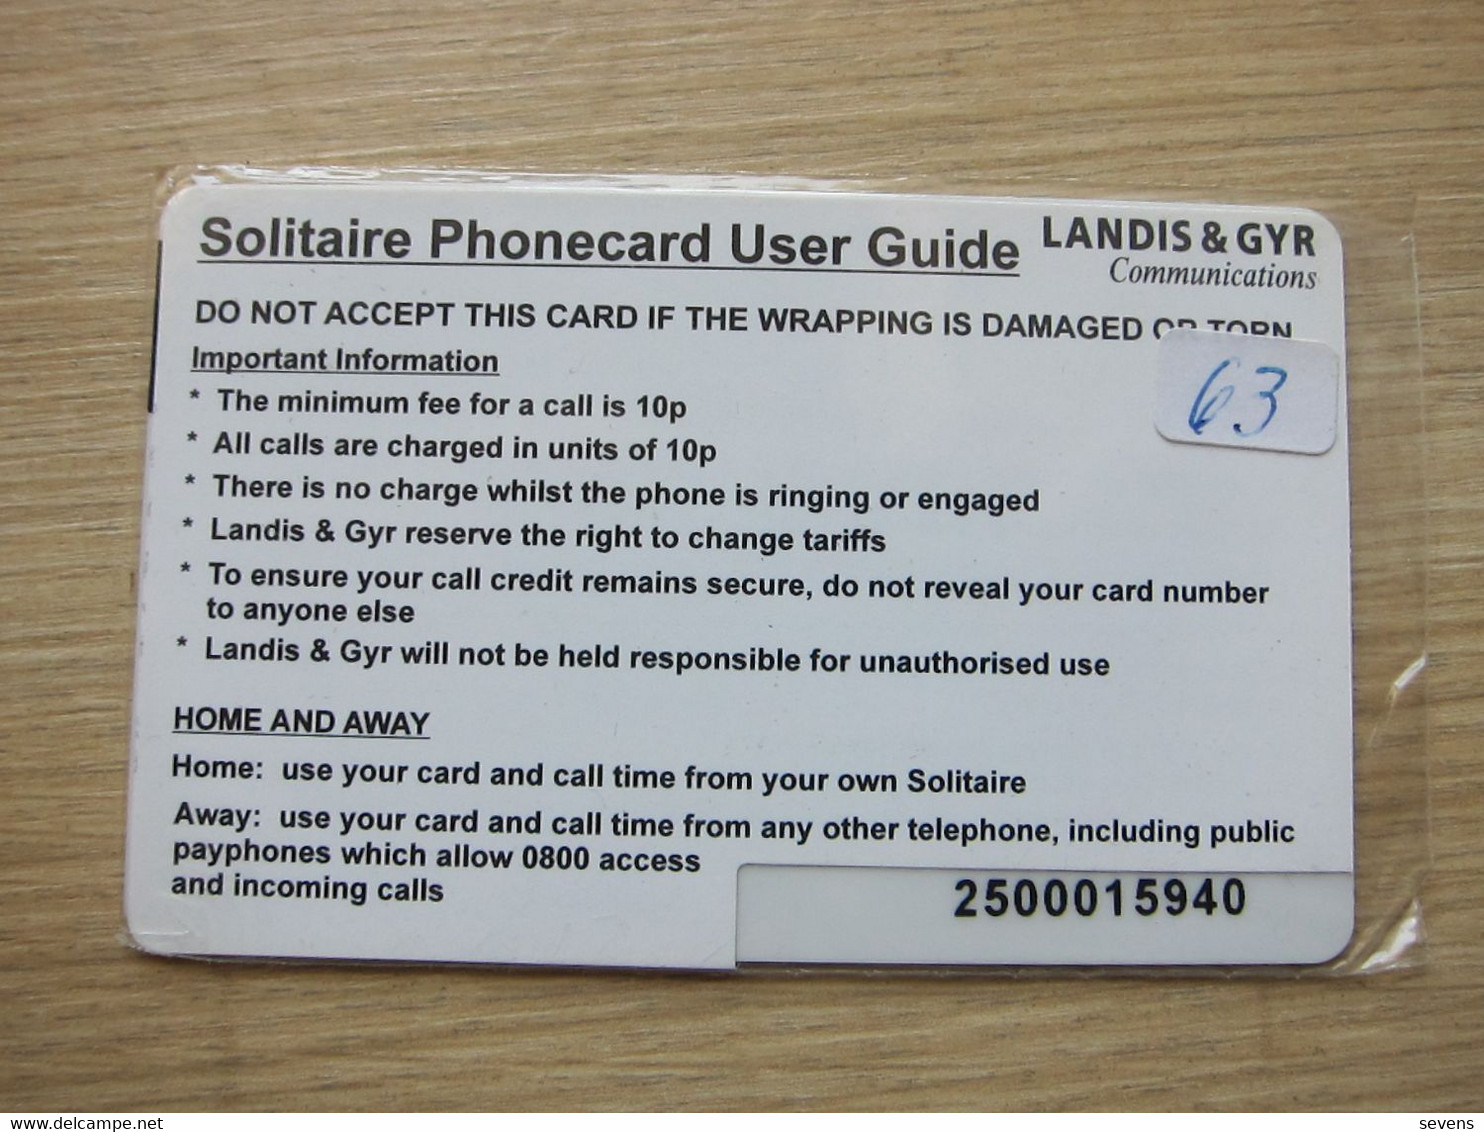 Landis & Gyr Magnetic Phonecard, Solitaire Swipecard Phone 5 Pound Facevalue,mint In Blister - [ 8] Companies Issues